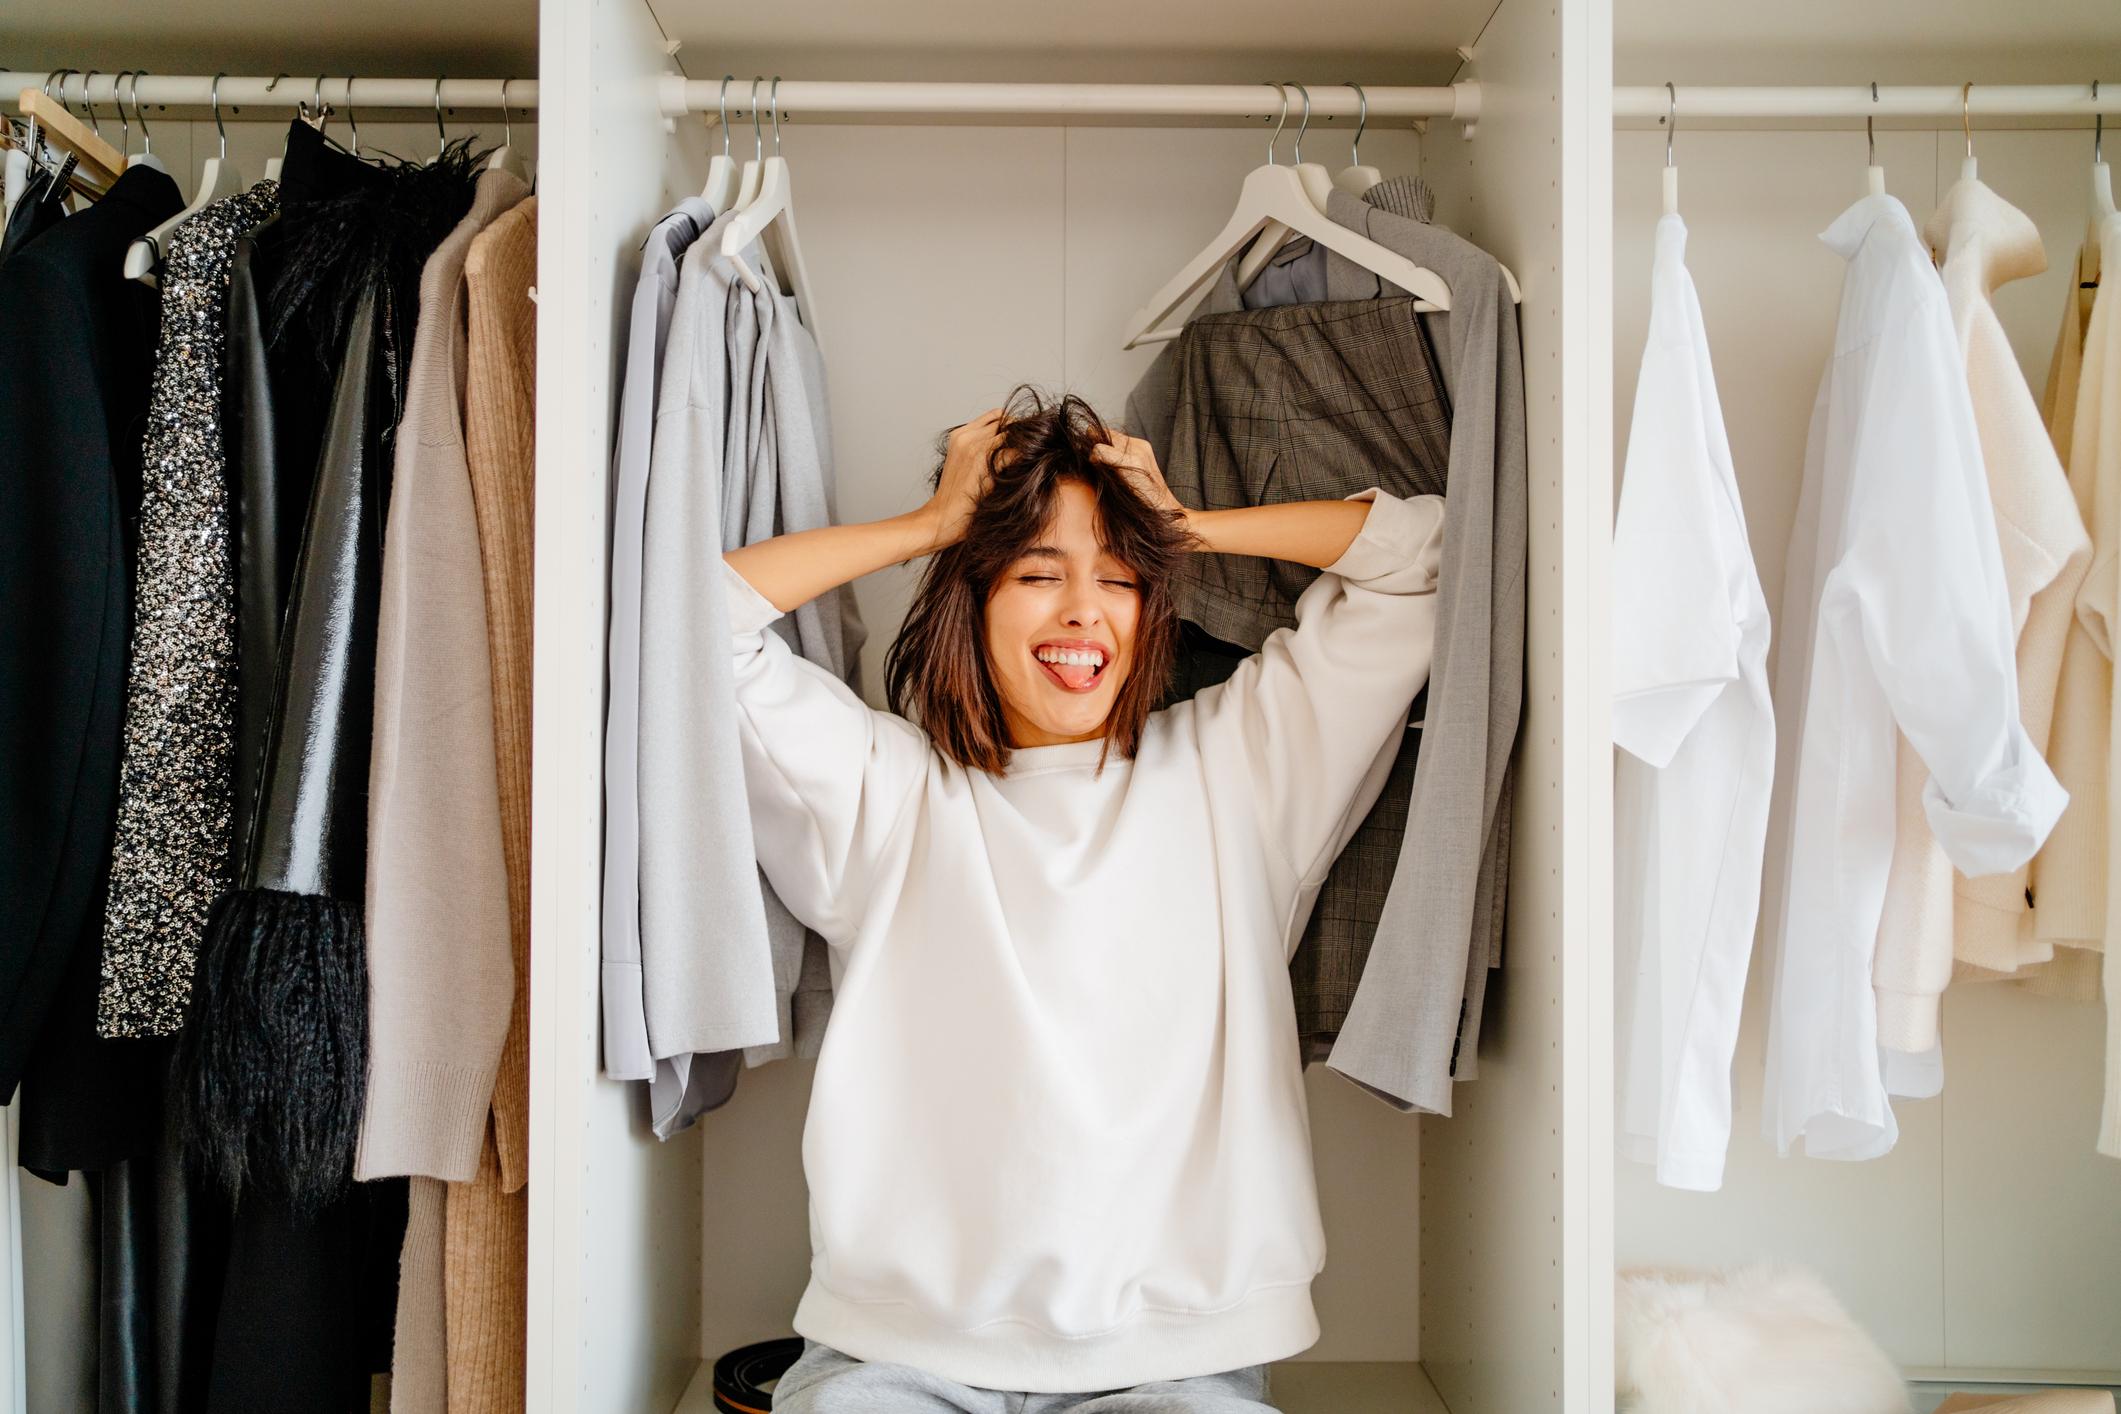  A woman is celebrating her capsule wardrobe. She stands between the clothes that are hanging in a closet. 